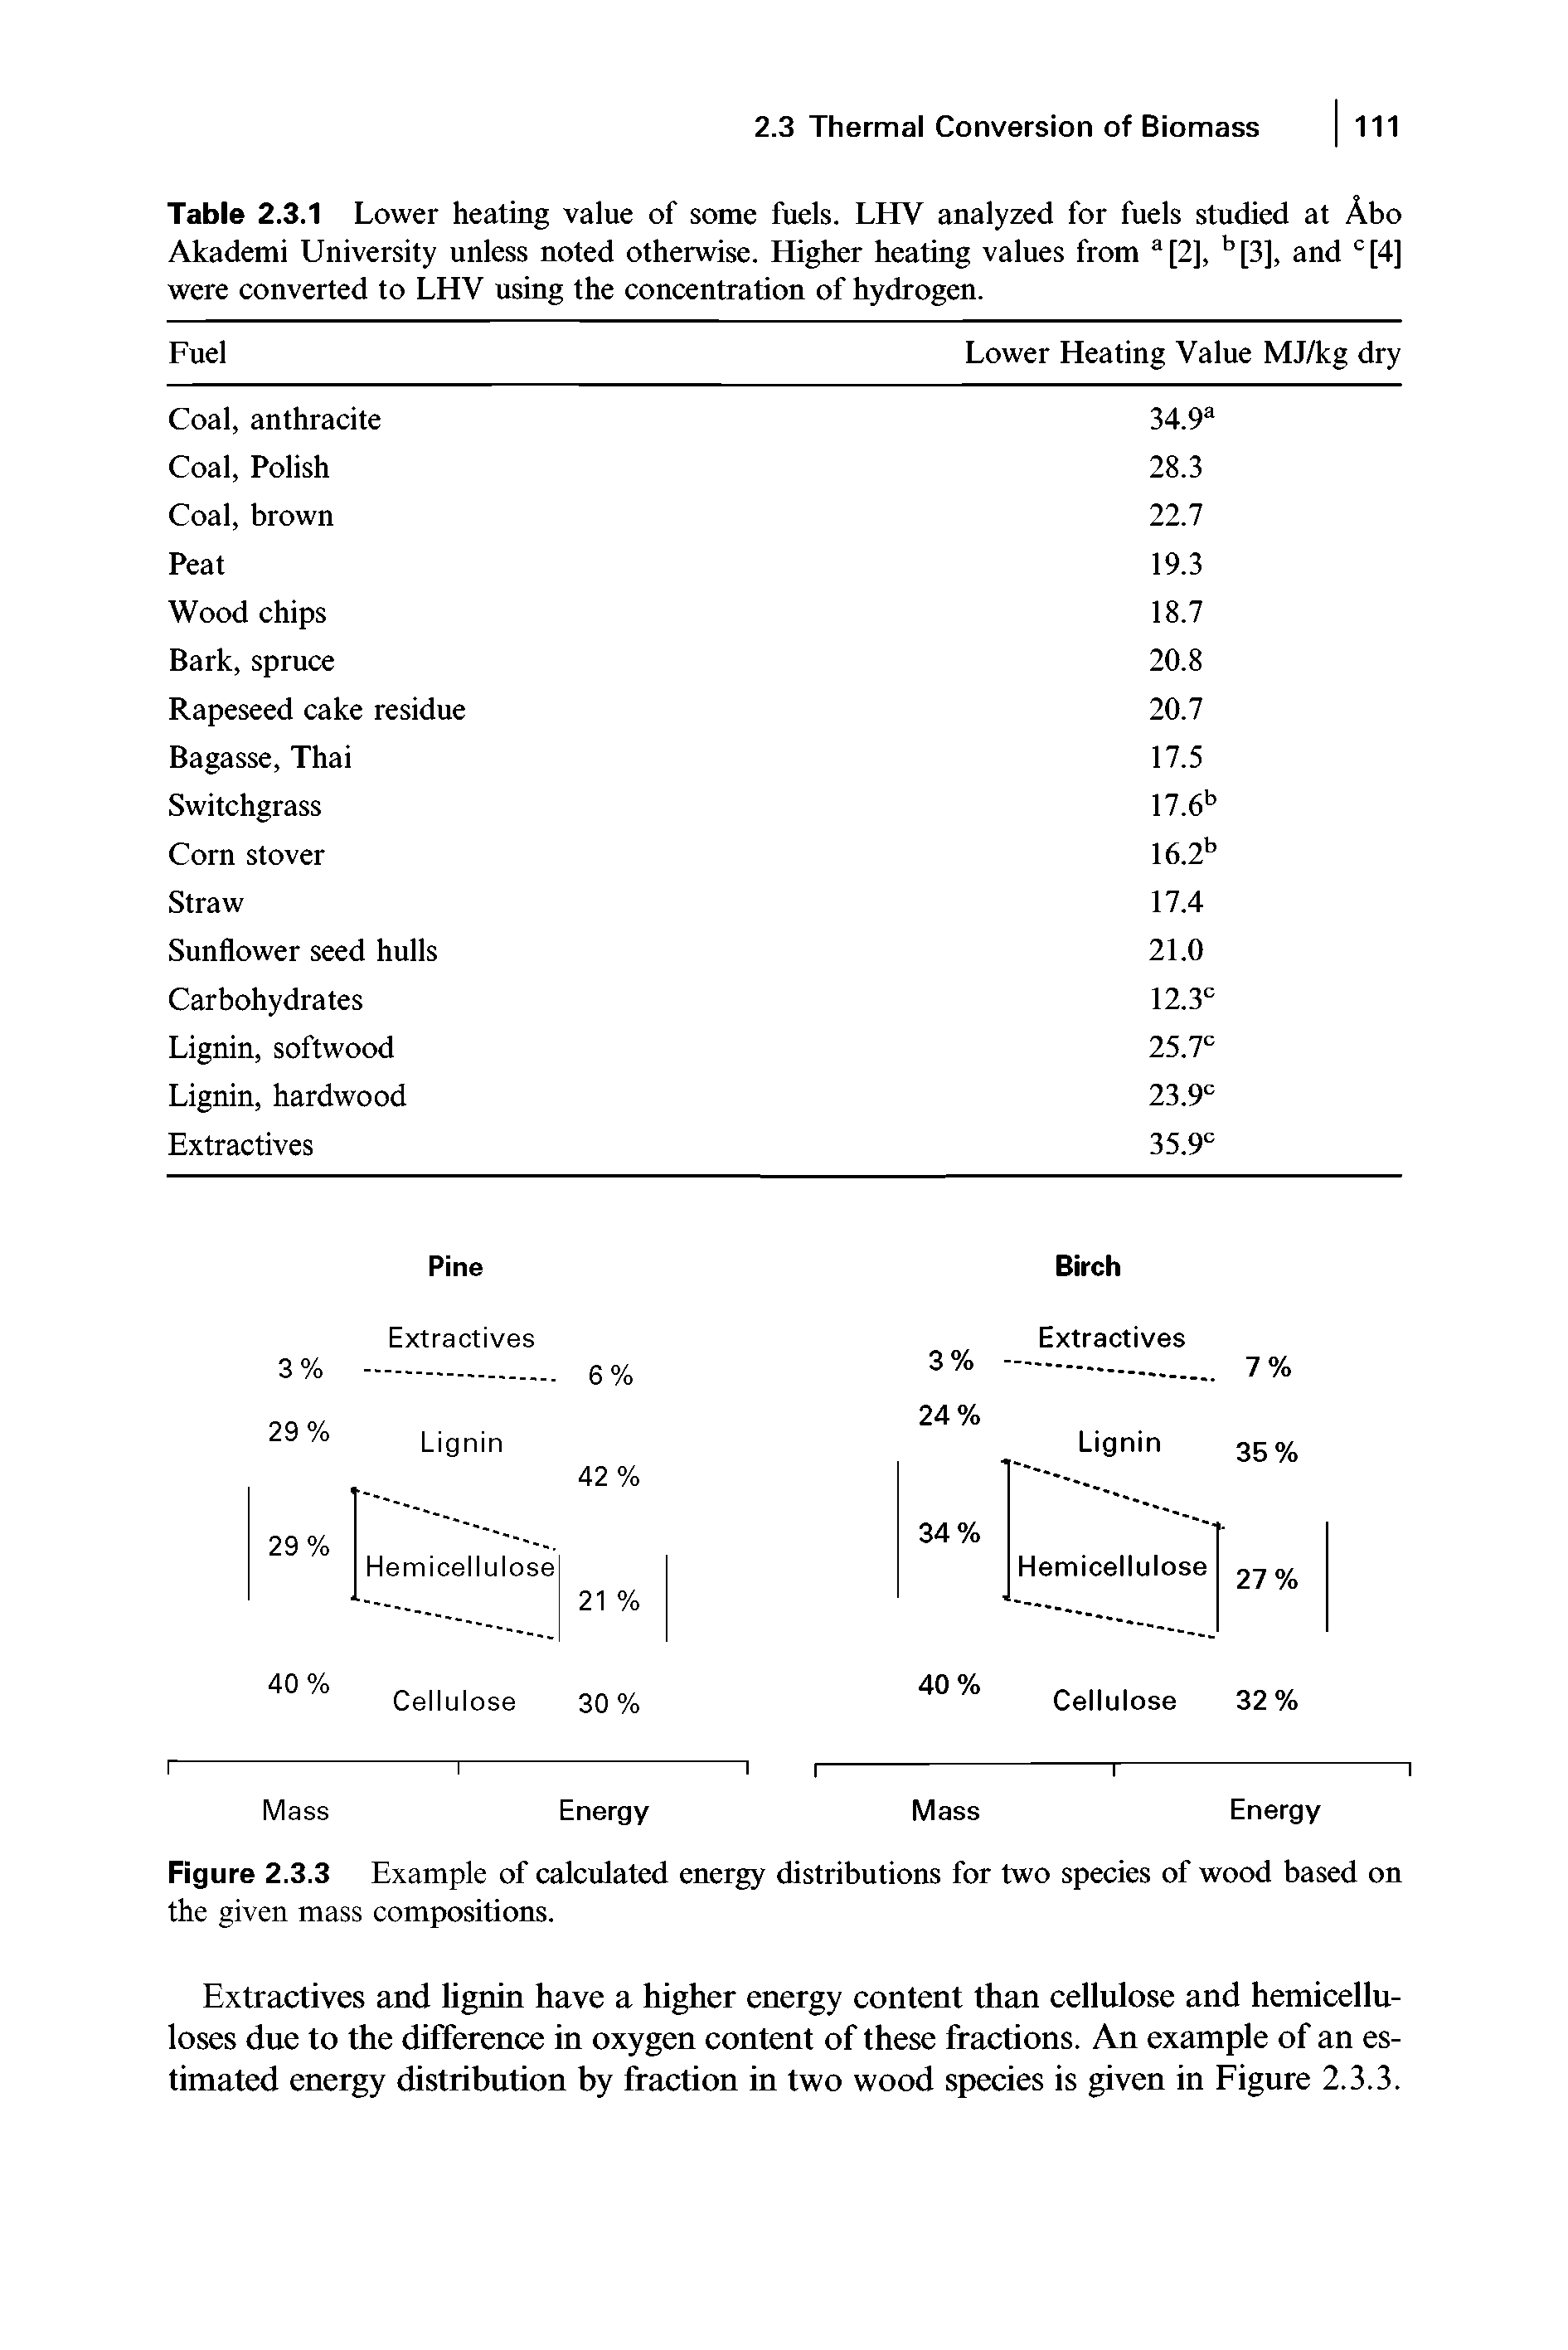 Table 2.3.1 Lower heating value of some fuels. LHV analyzed for fuels studied at Abo Akademi University unless noted otherwise. Higher heating values from a[2], b[3], and c[4] were converted to LHV using the concentration of hydrogen.